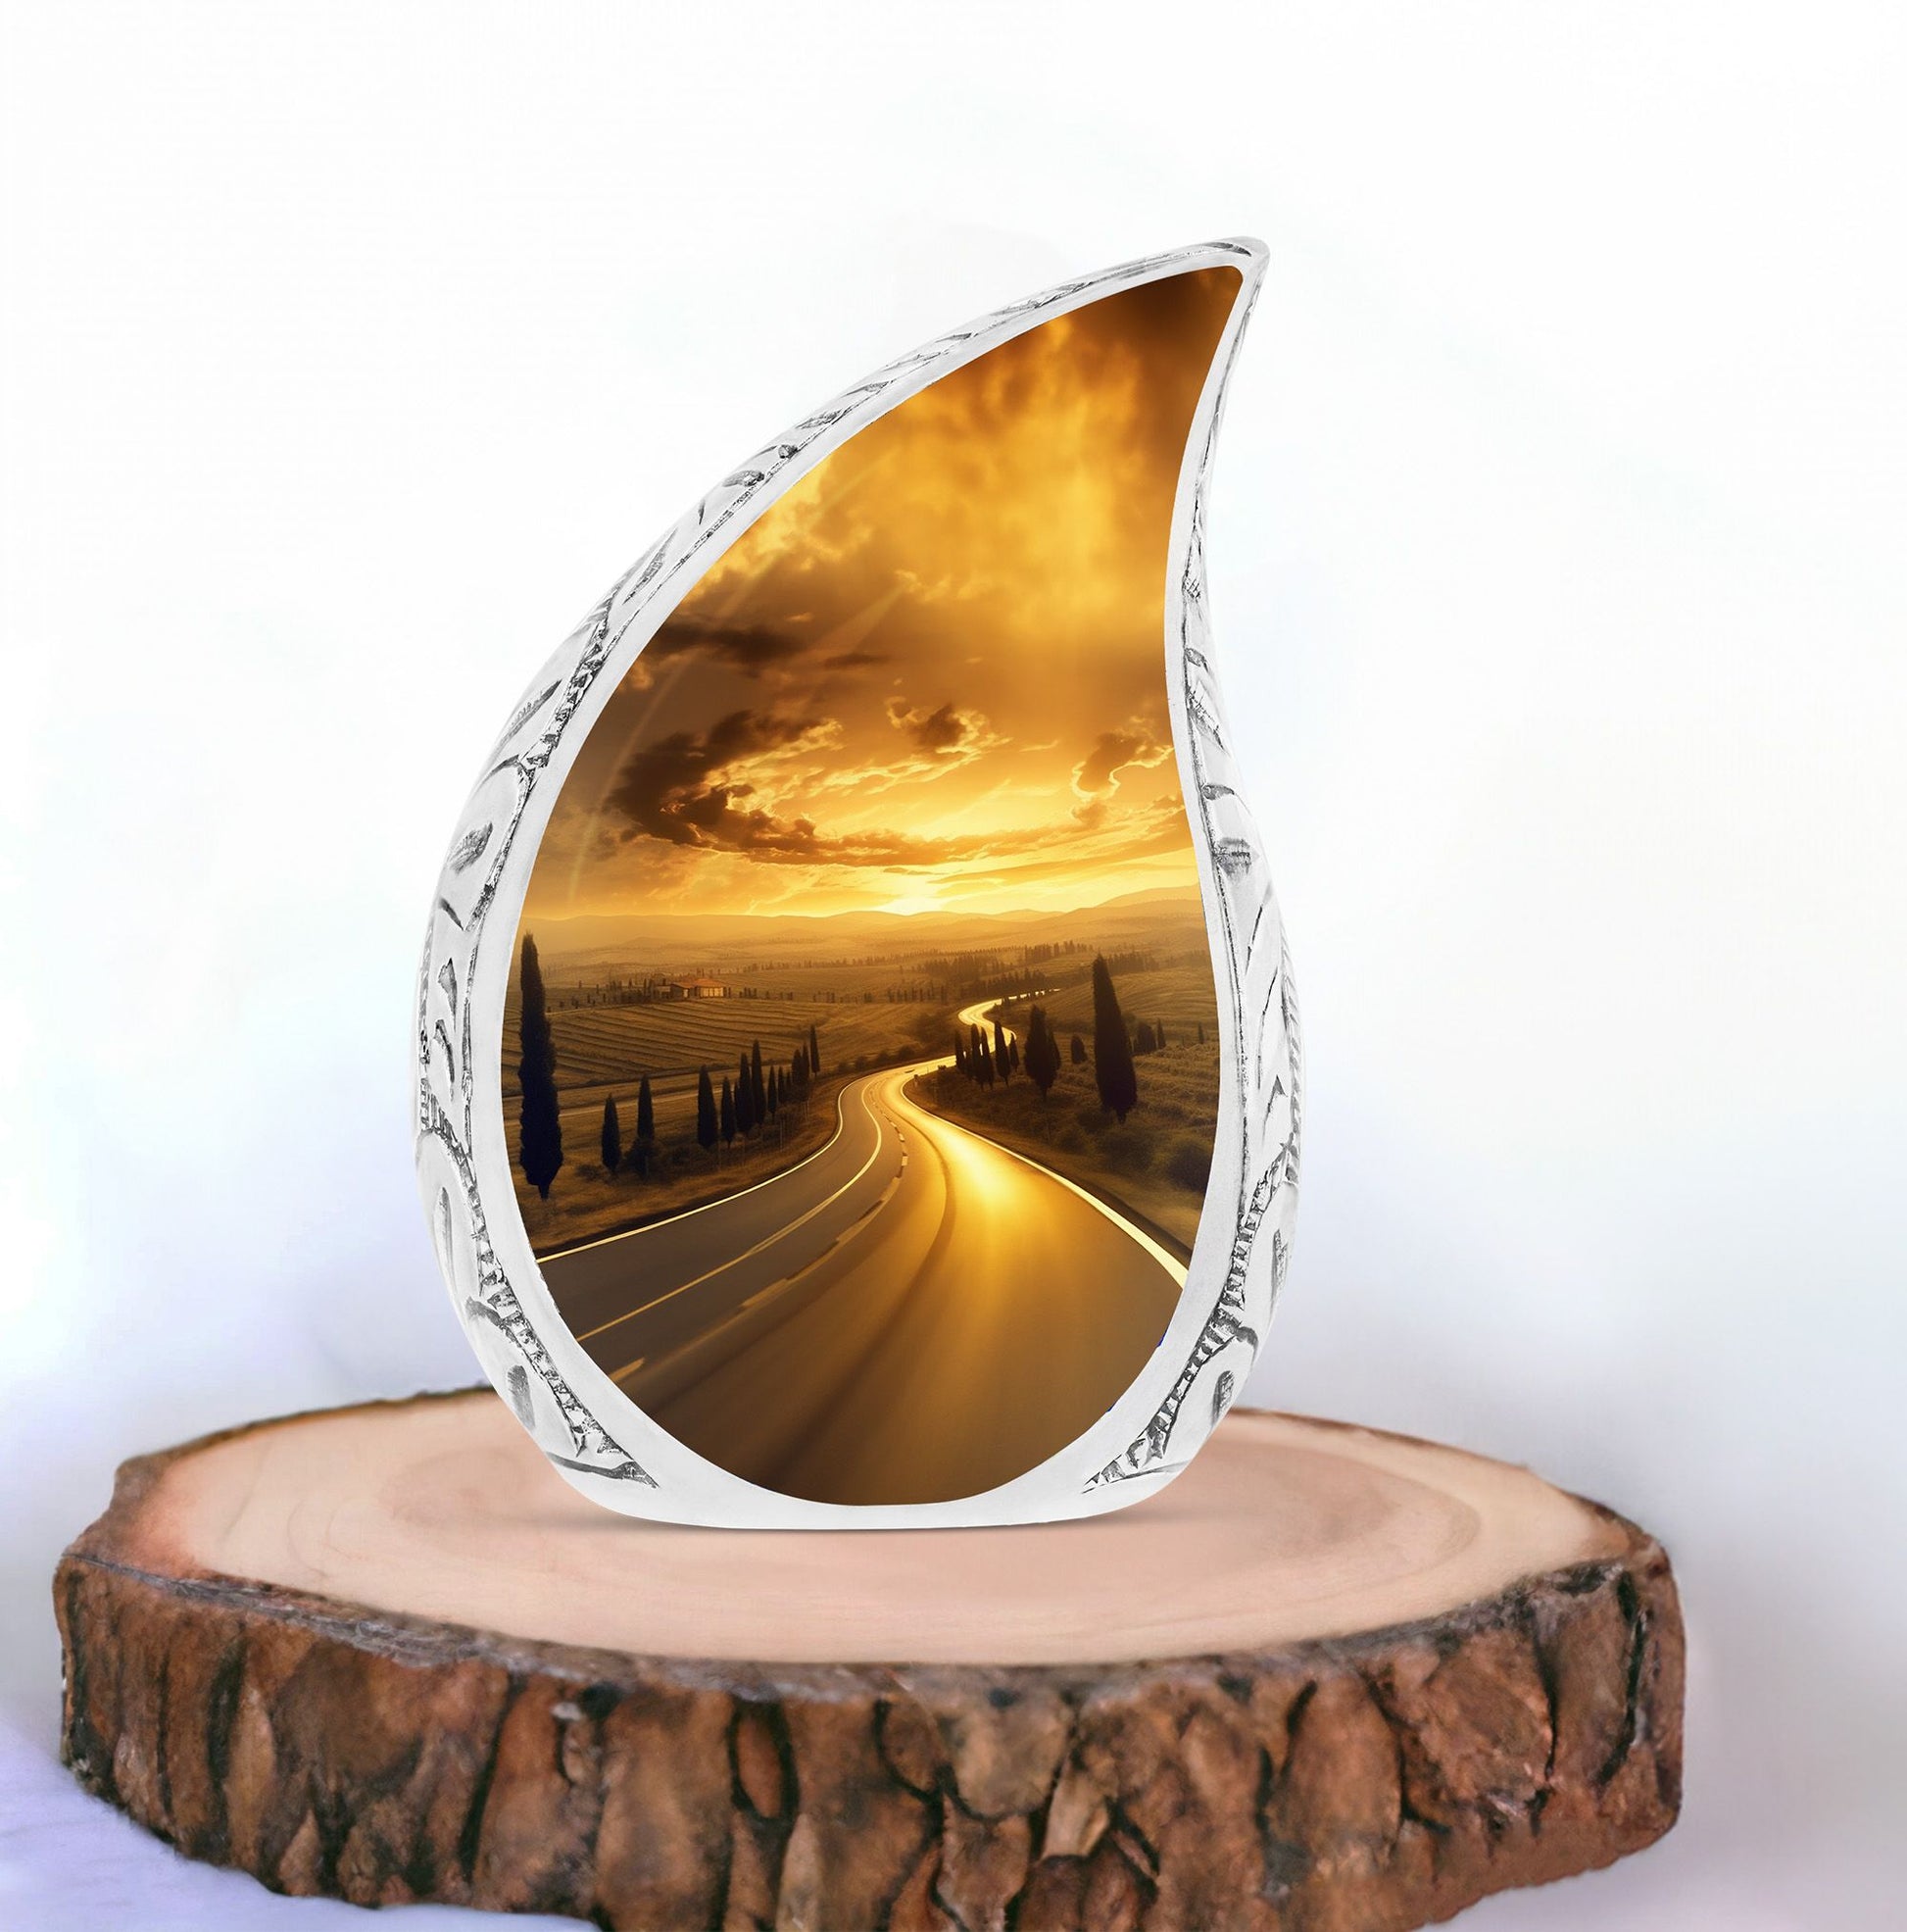 Sunset Boulevard large urn for human ashes, suitable for adult man, a dignified option for funeral urns